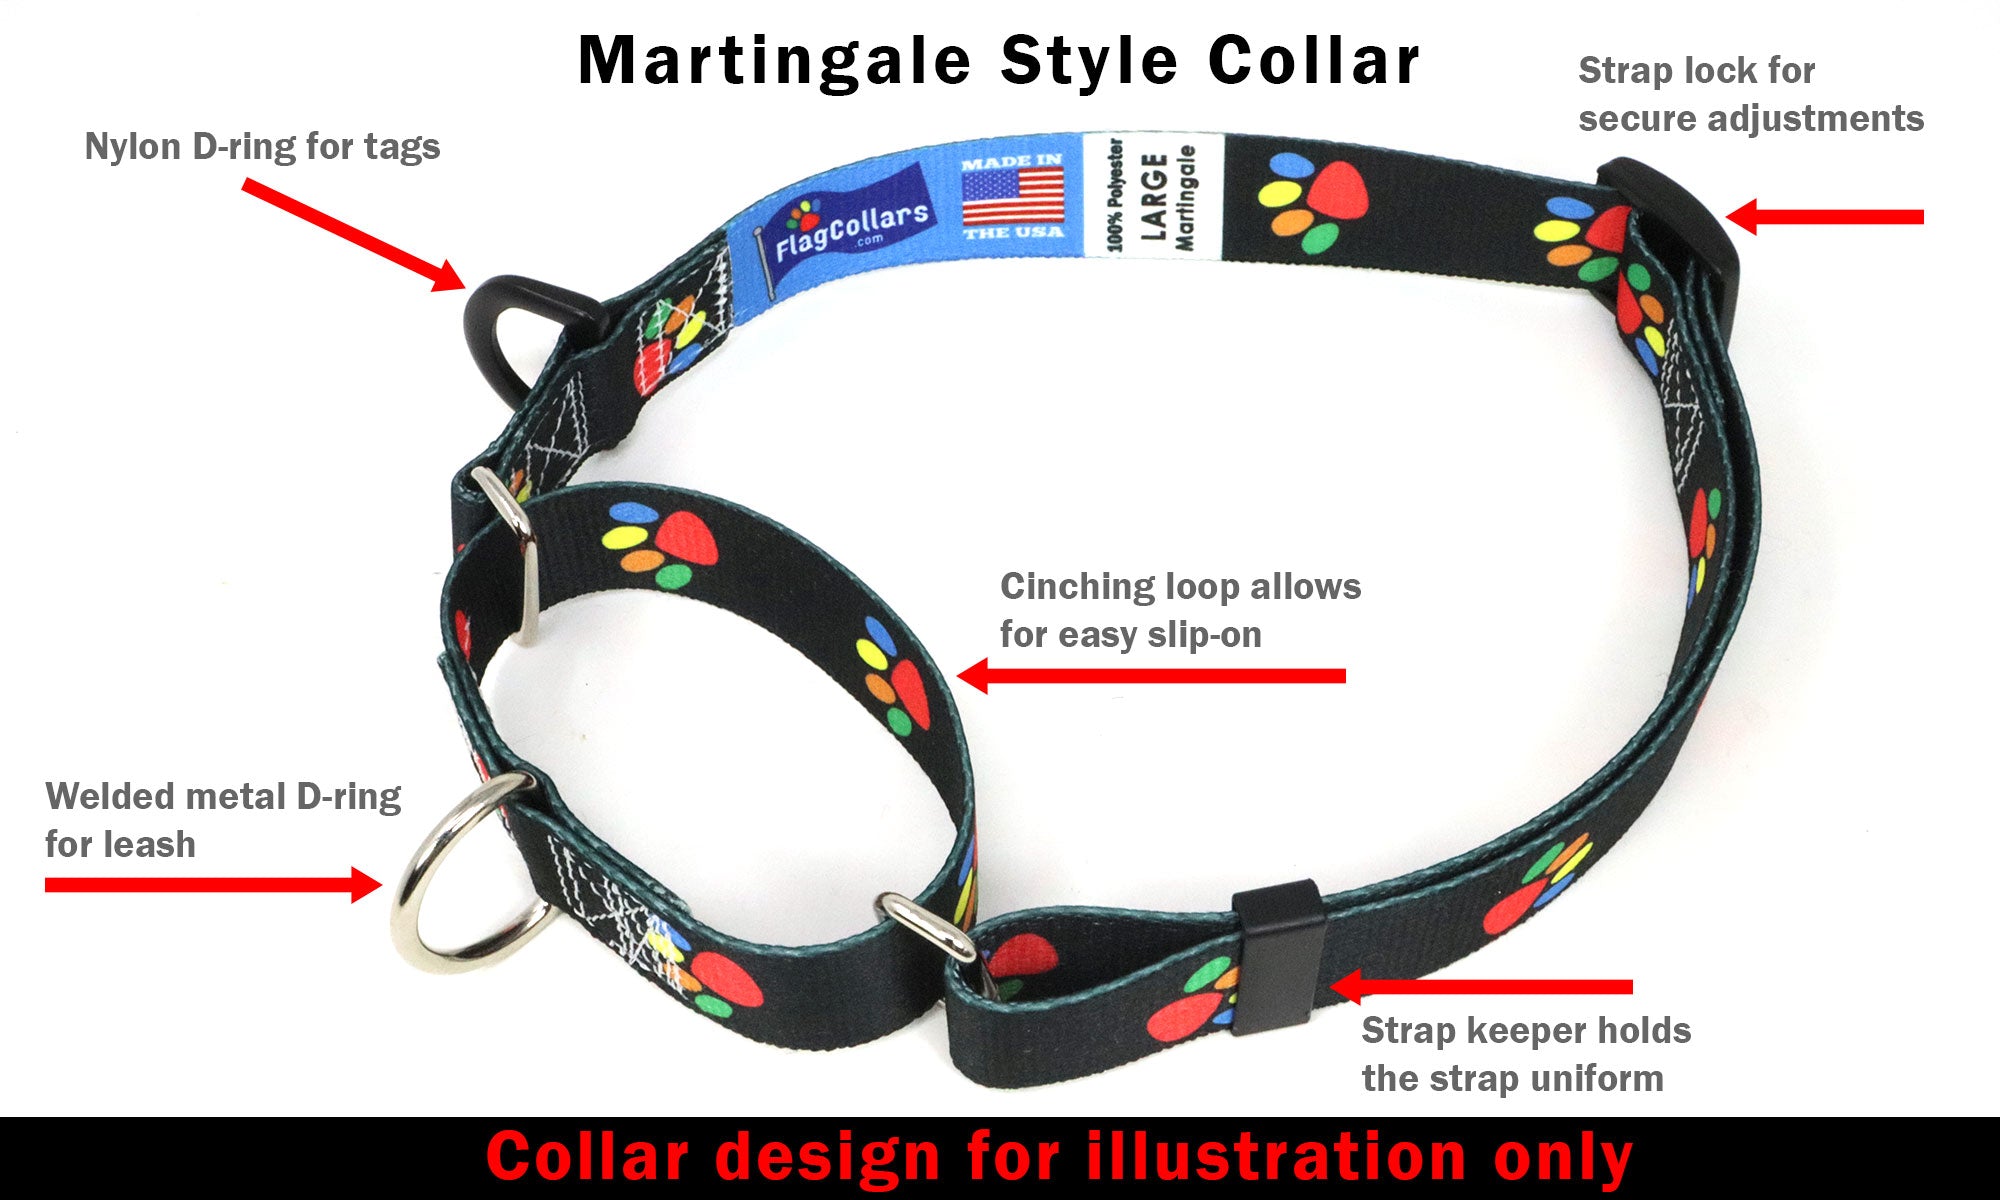 United States Dog Collar for Soccer Fans | Black or Pink | Quick Release or Martingale Style | Made in NJ, USA